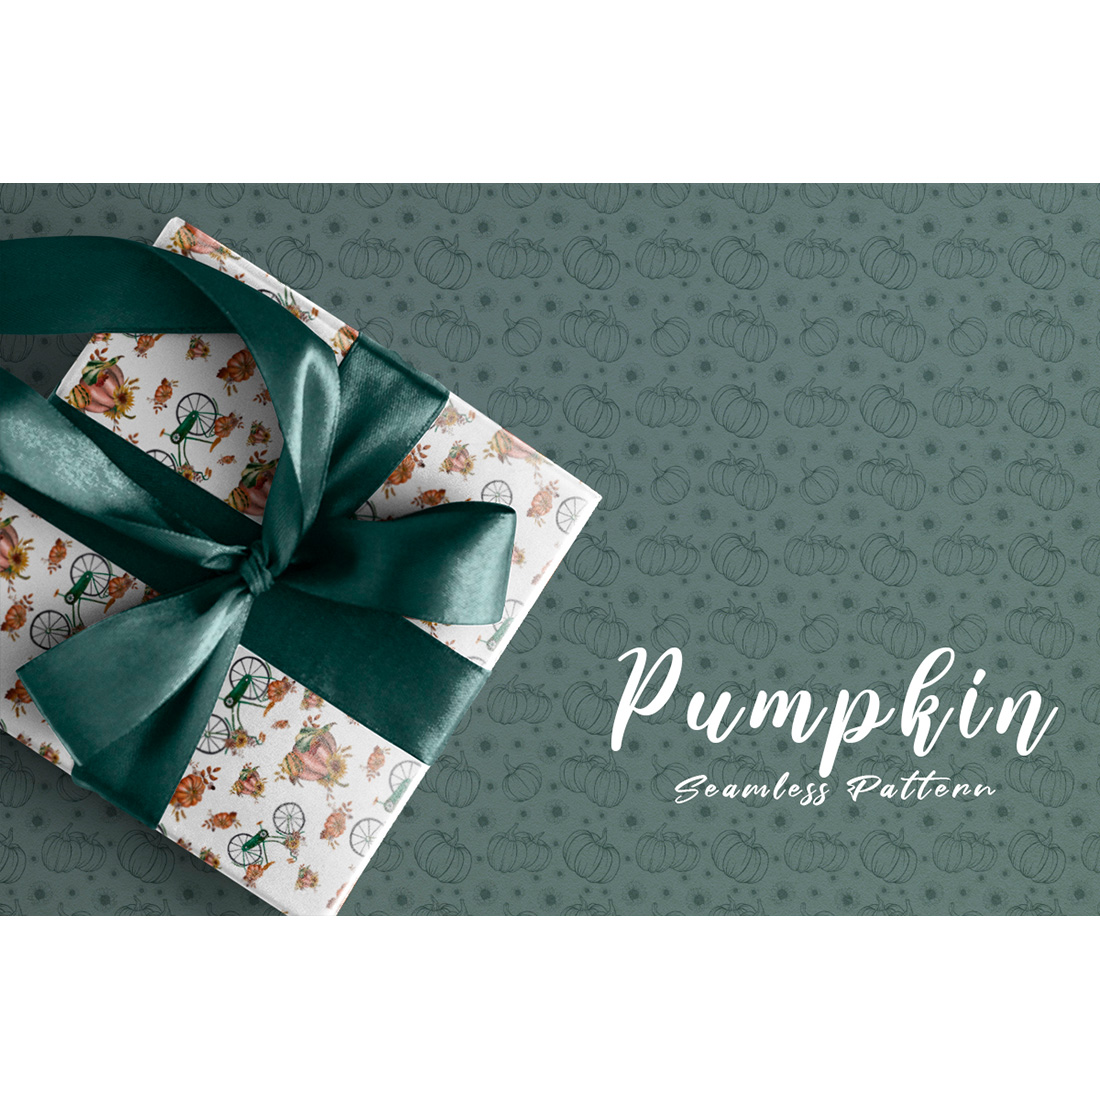 Image of wrapping paper with colorful patterns with pumpkin